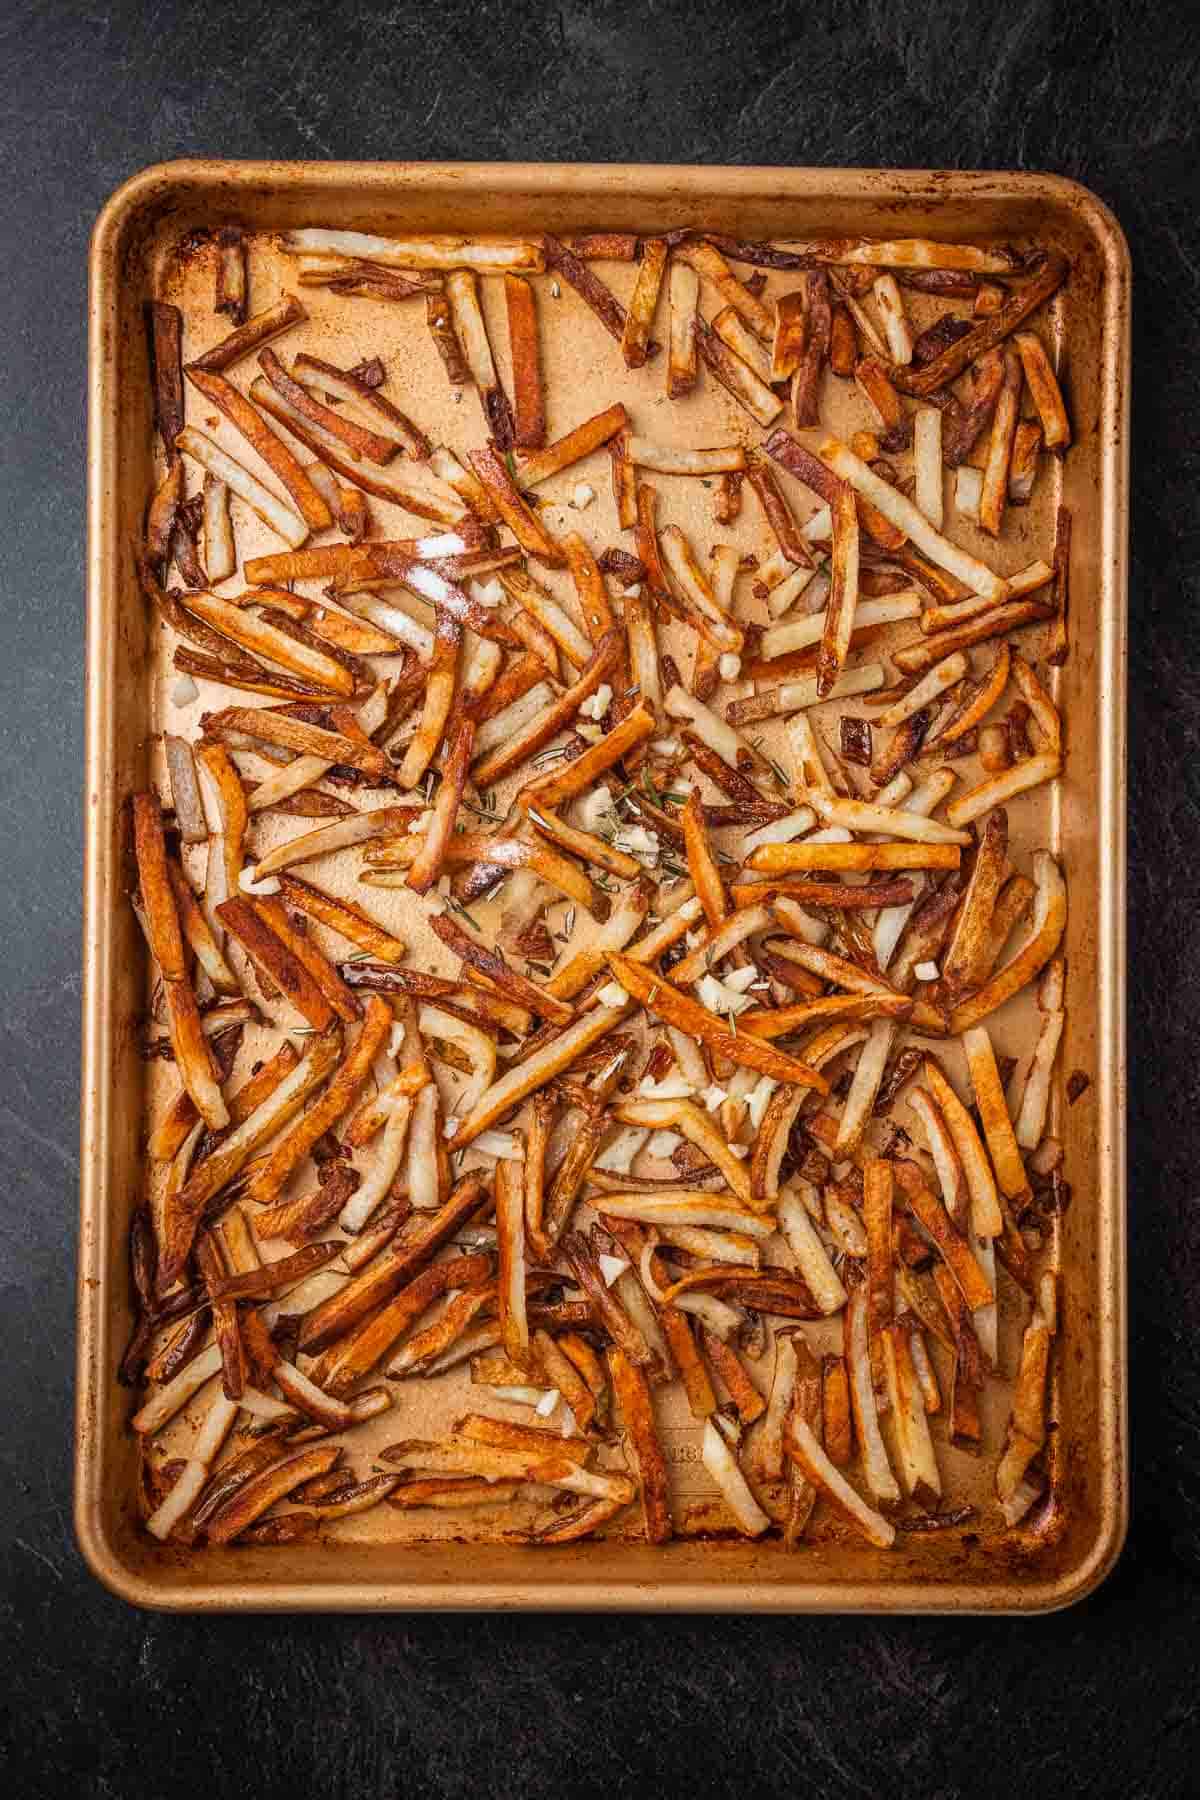 Bakng sheet with fries prepped for cooking.